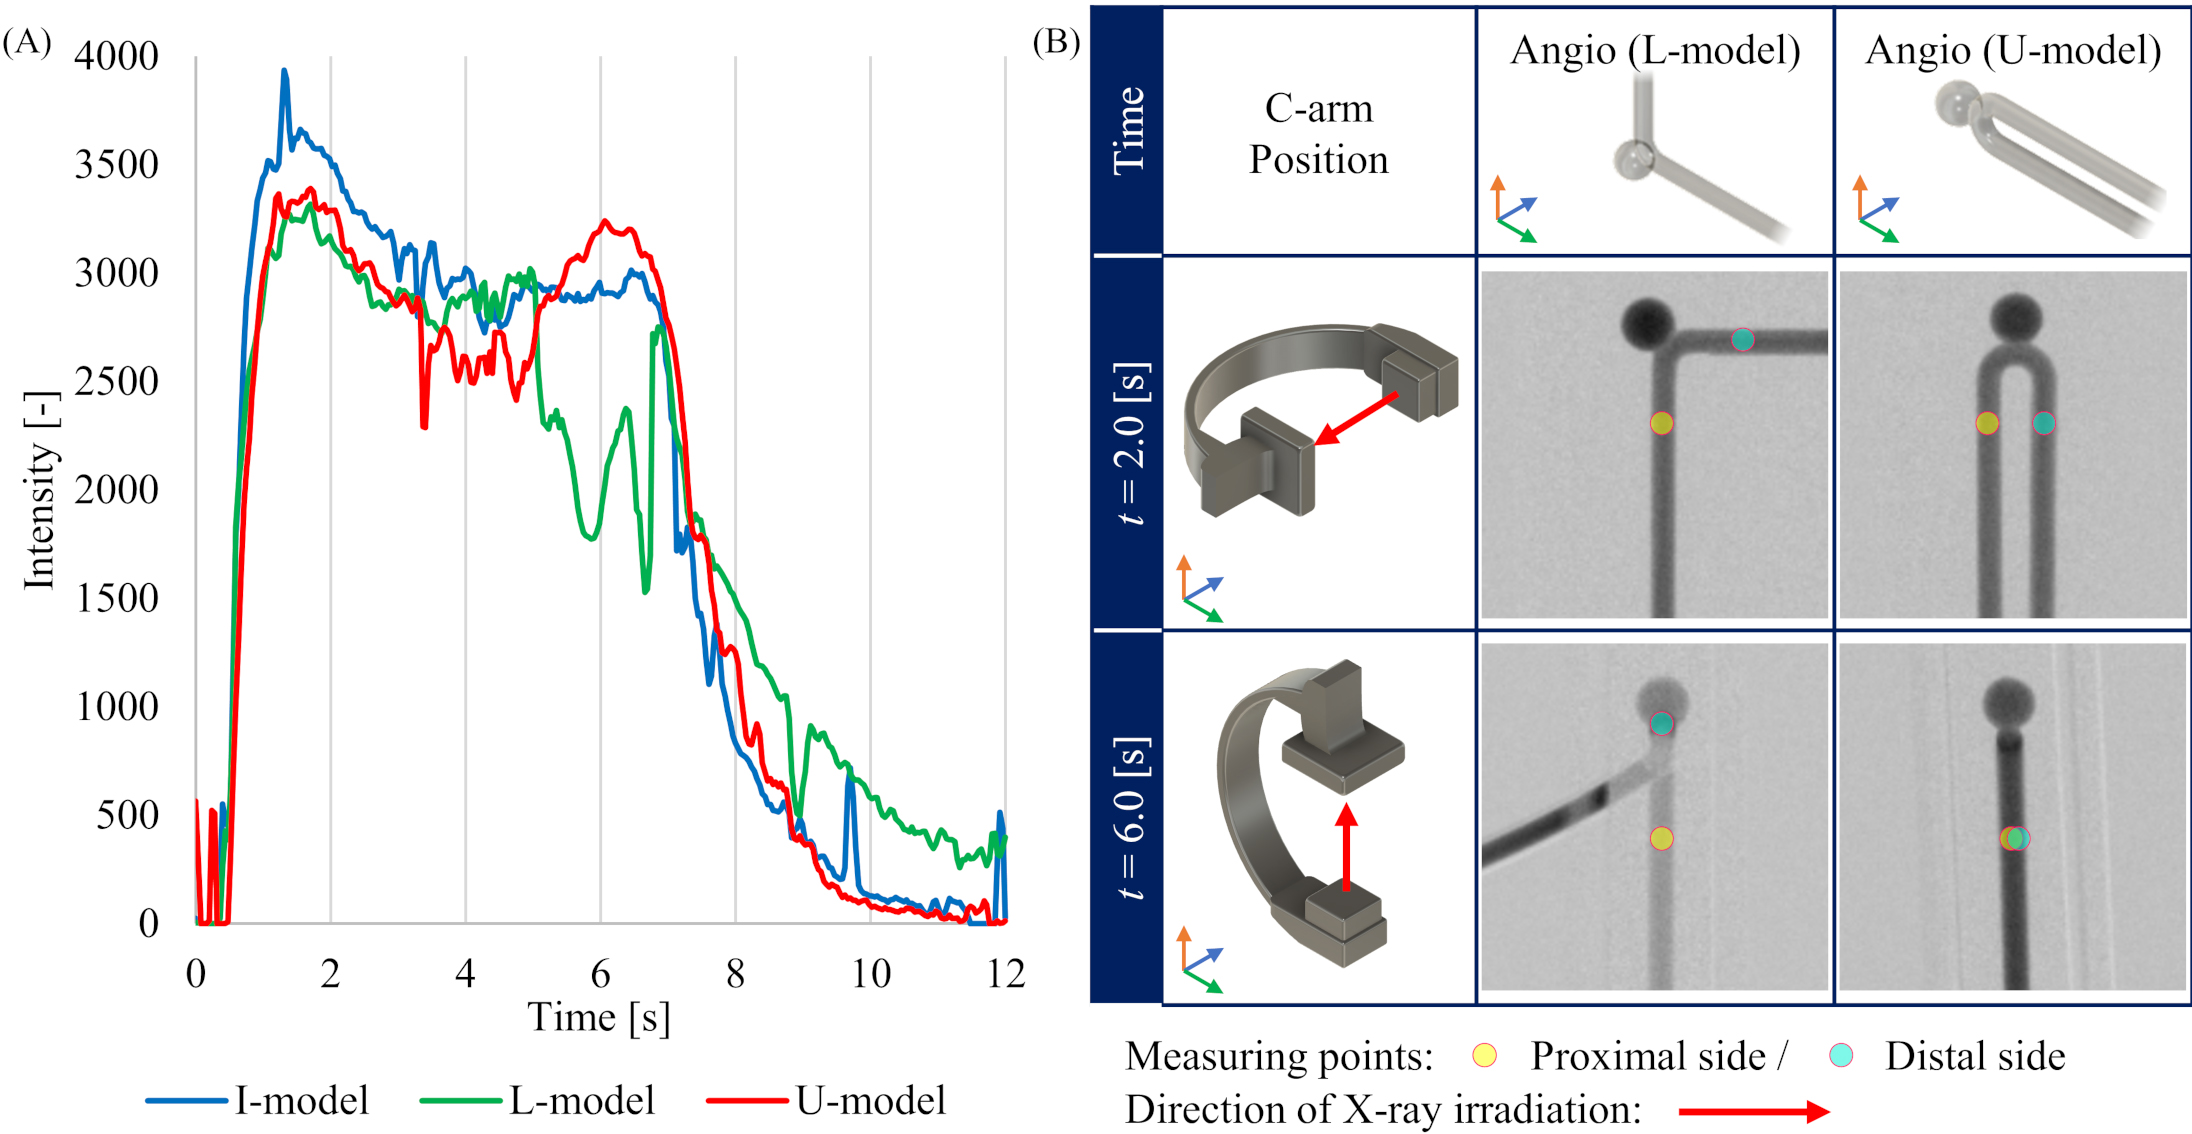 Conditions during 4D-DSA imaging in each model. (A) Time intensity curves (TICs) at the measurement point on distal side in the aneurysm phantom model. (B) Geometrical relationship between C-arm position and L-model or U-model depending on the time during the imaging protocol.